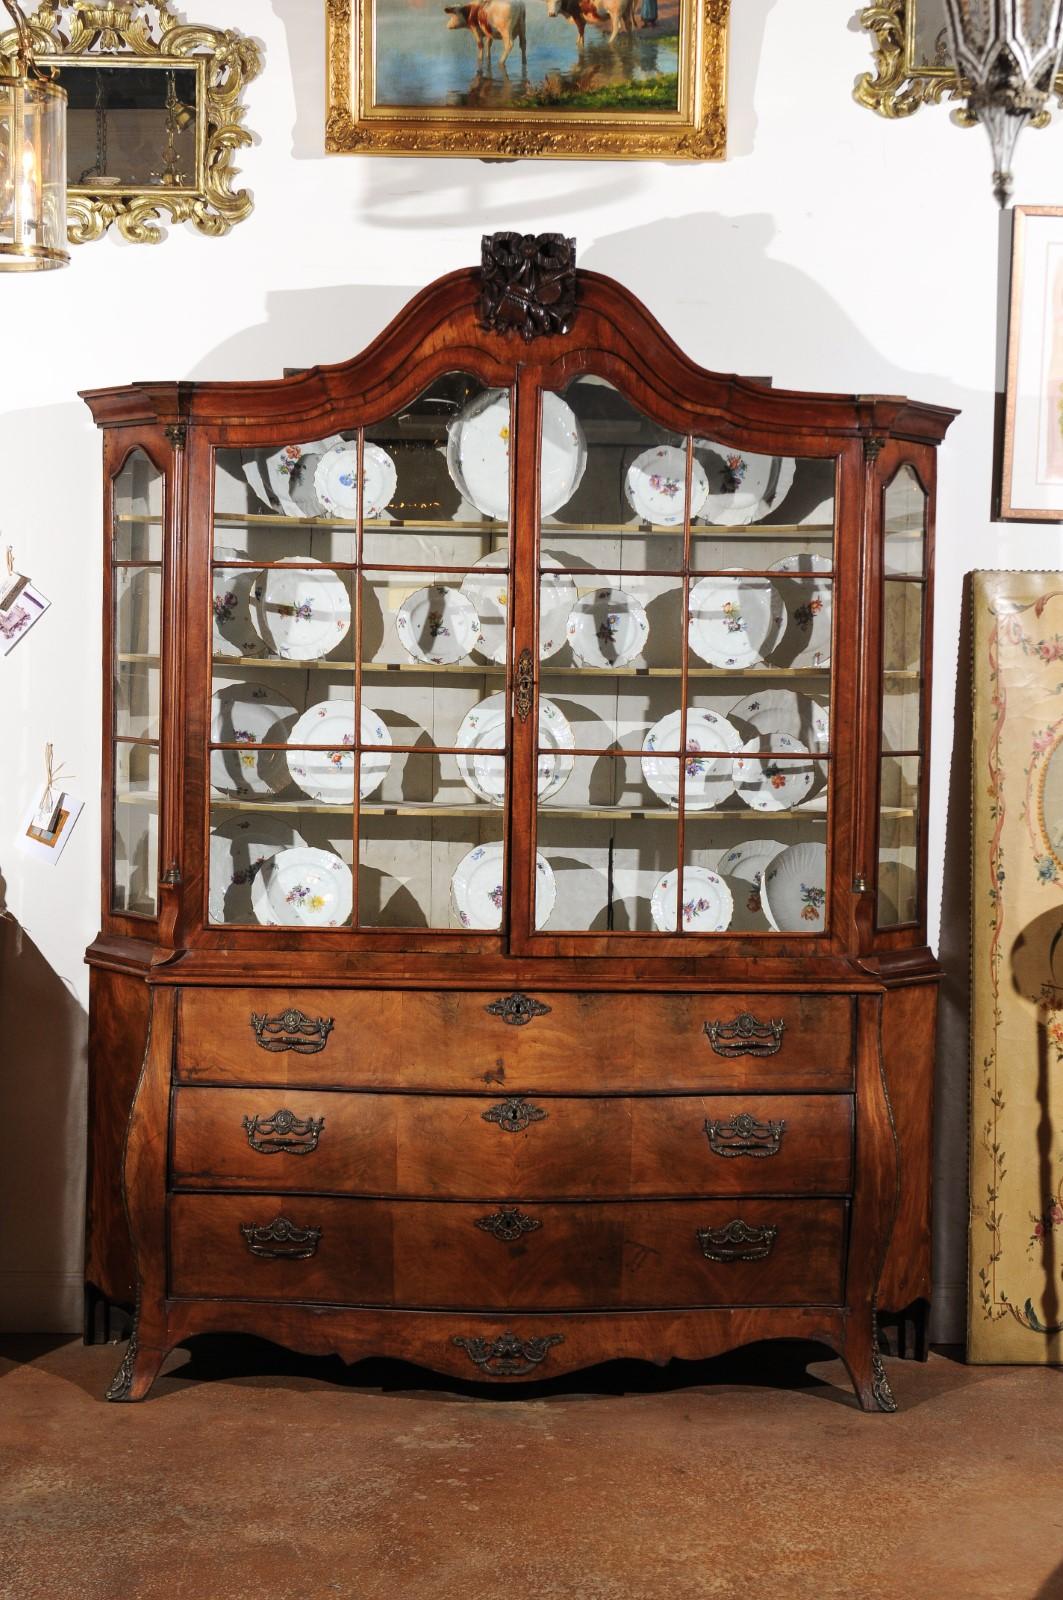 A Dutch Rococo period walnut vitrine cabinet from the late 18th century, with hand carved hunting trophy, glass doors and bombé chest. Born in the Netherlands in the later years of the 18th century, this exquisite Rococo cabinet features a